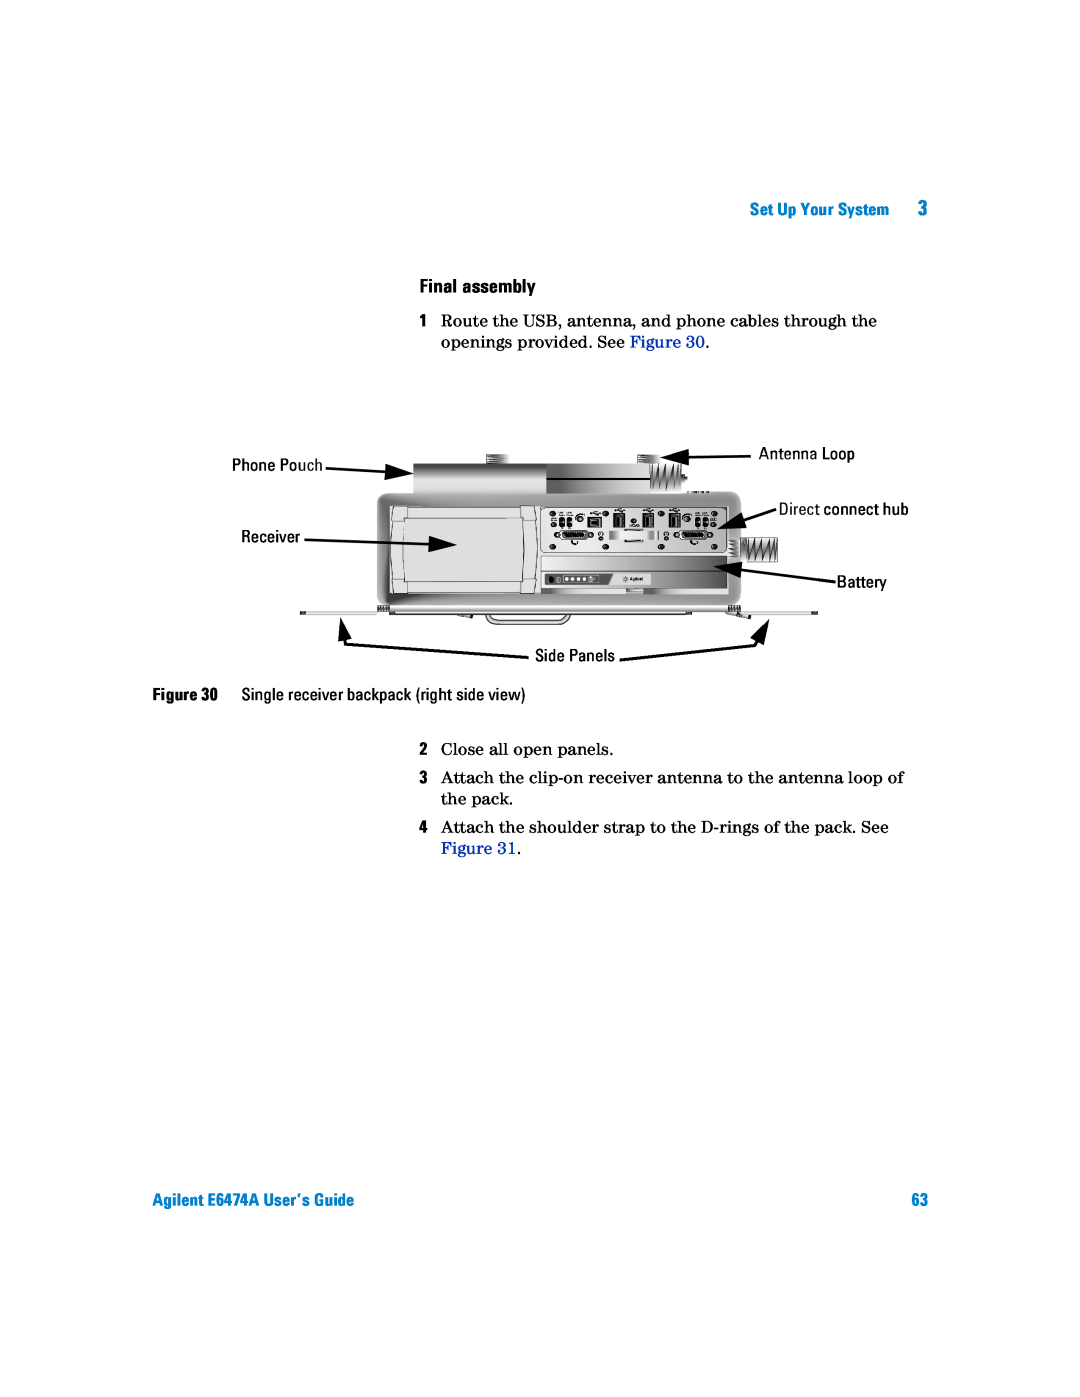 Agilent Technologies manual Final assembly, Set Up Your System, Agilent E6474A User’s Guide 